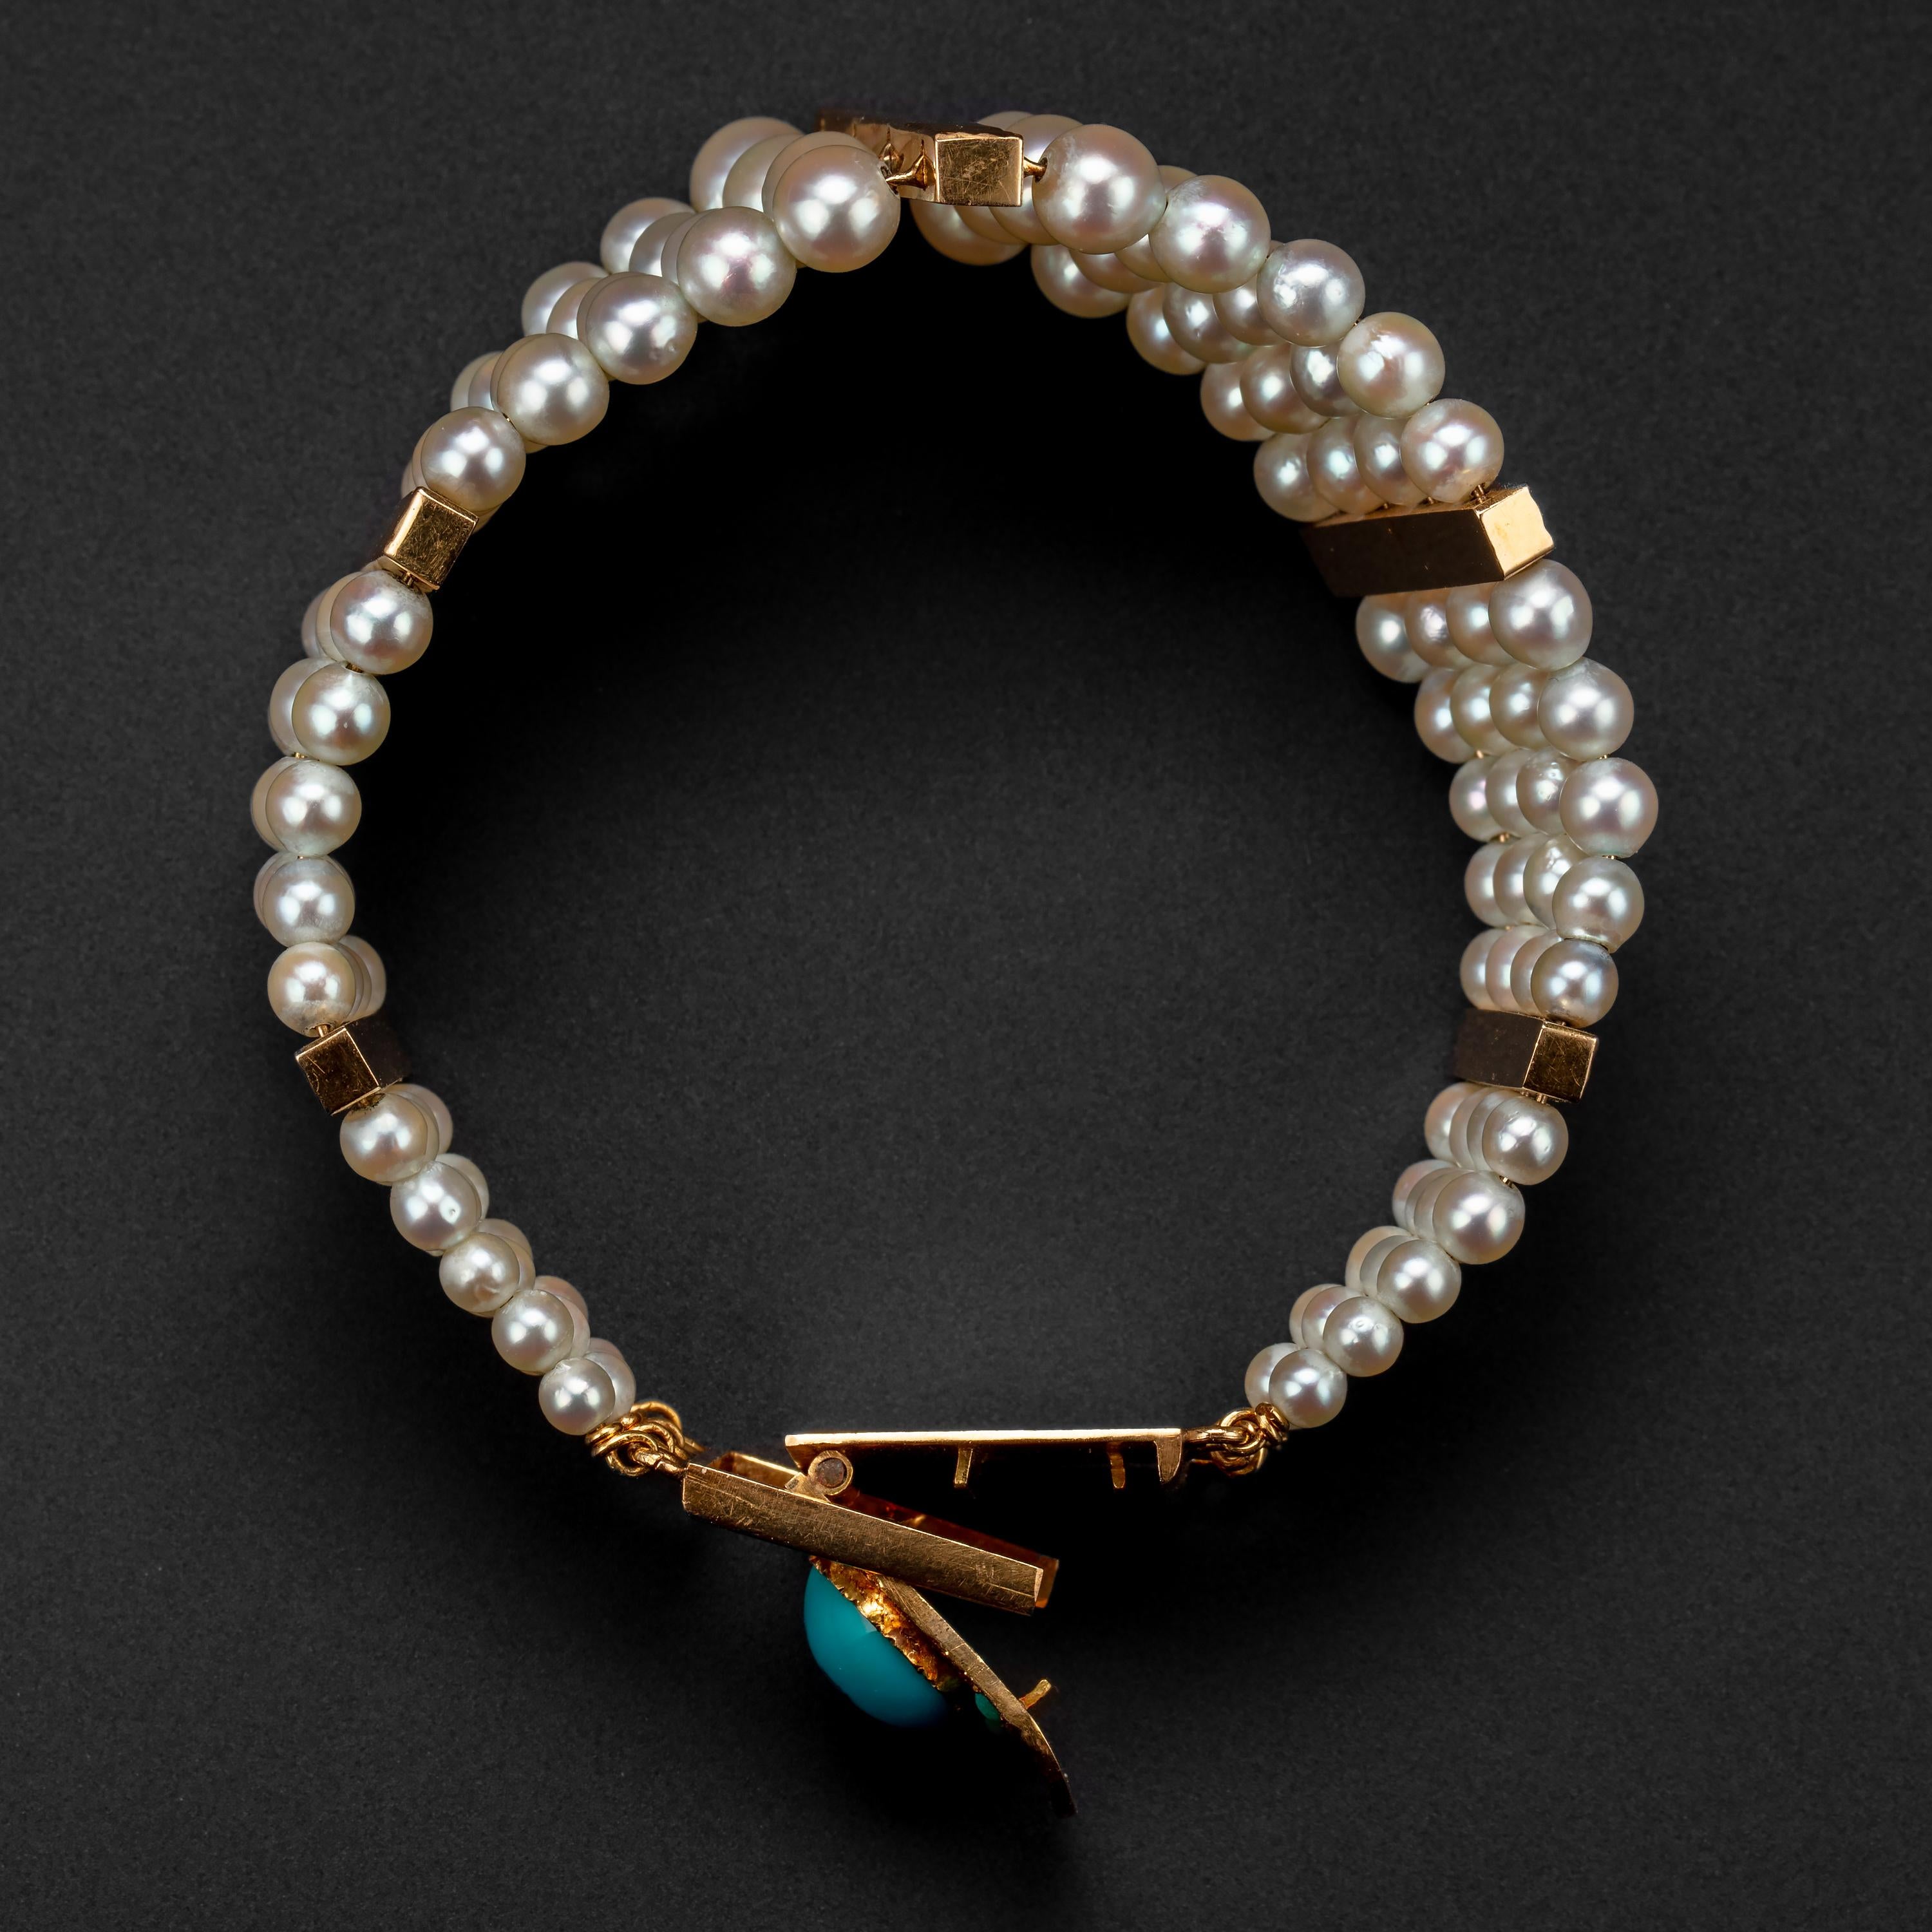 Modern Pearl Bracelet with Turquoise Clasp Midcentury